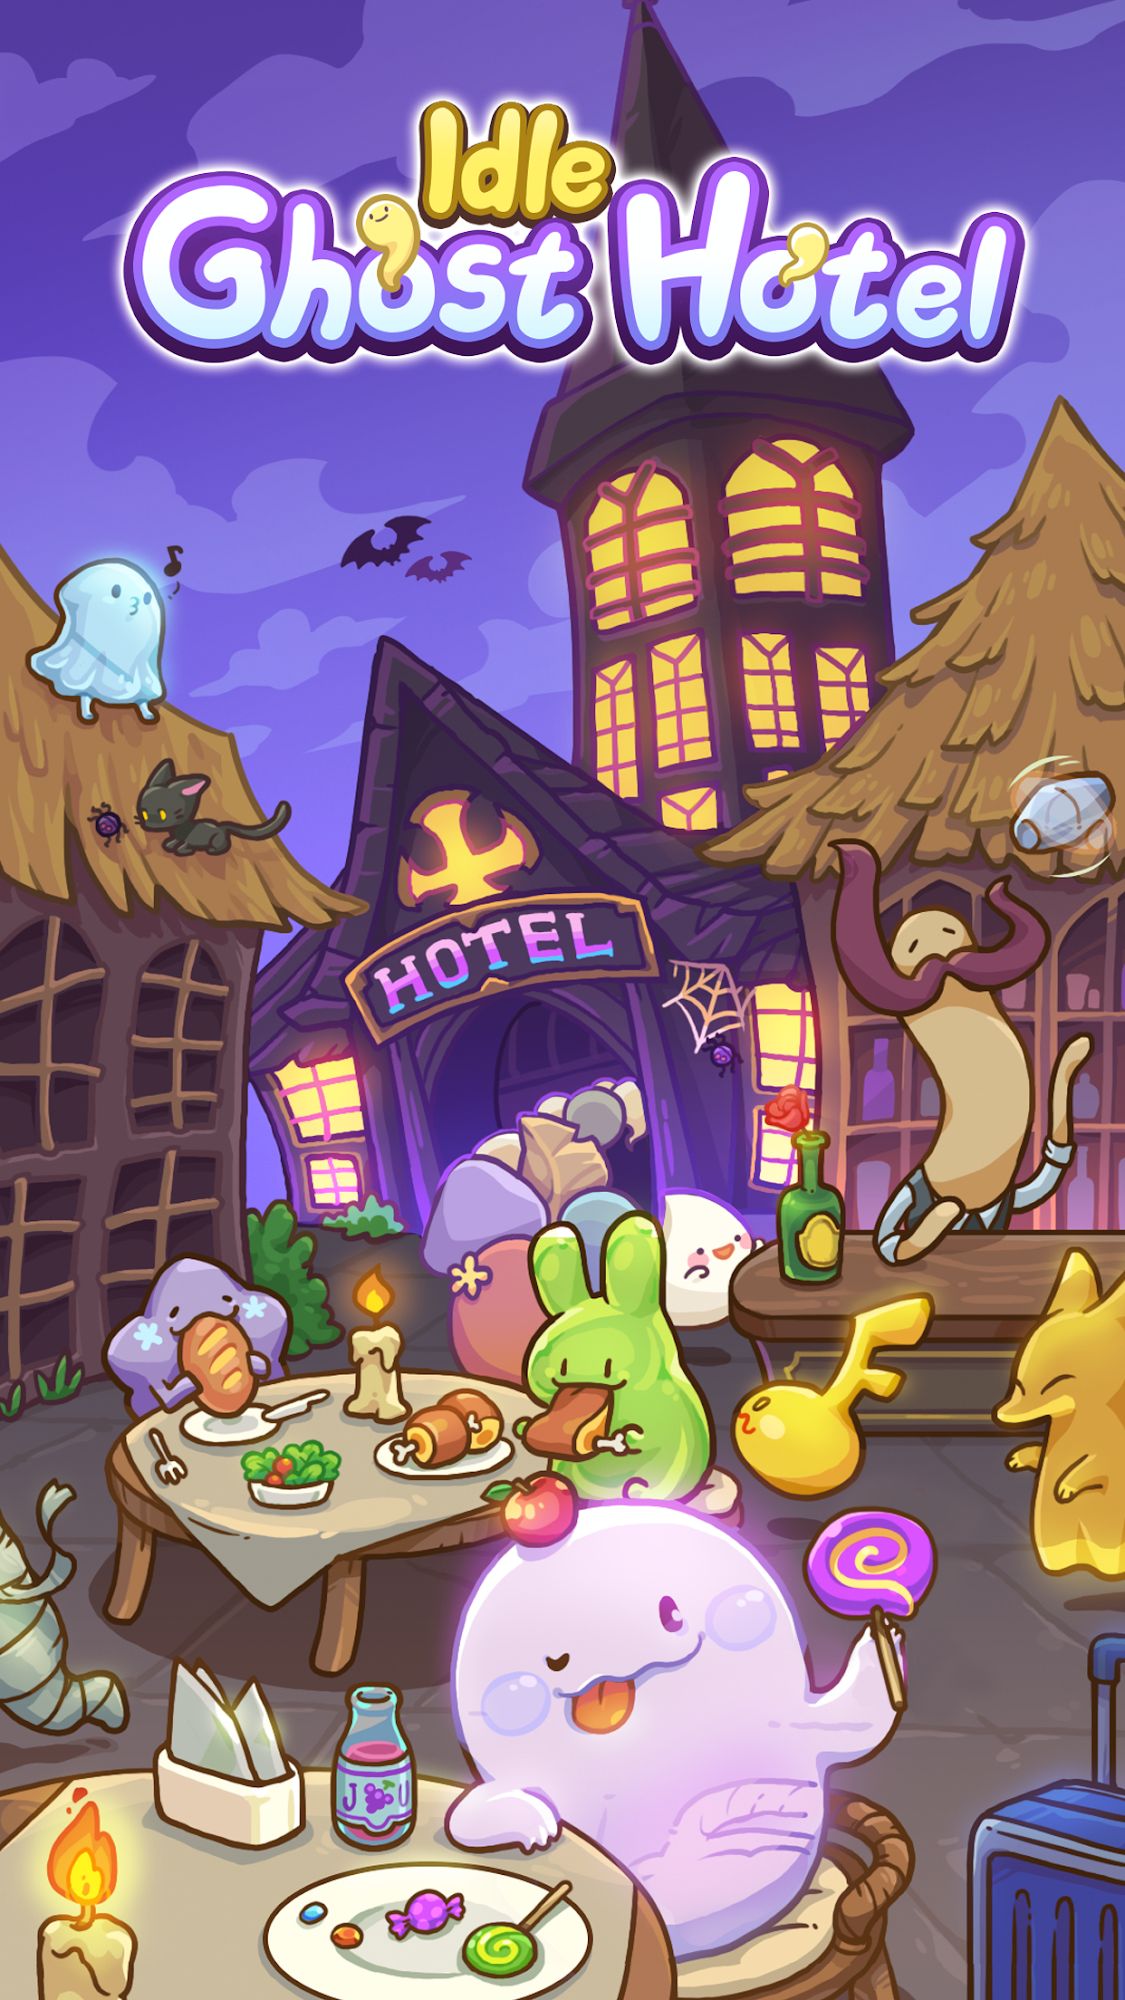 Scarica Idle Ghost Hotel gratis per Android.